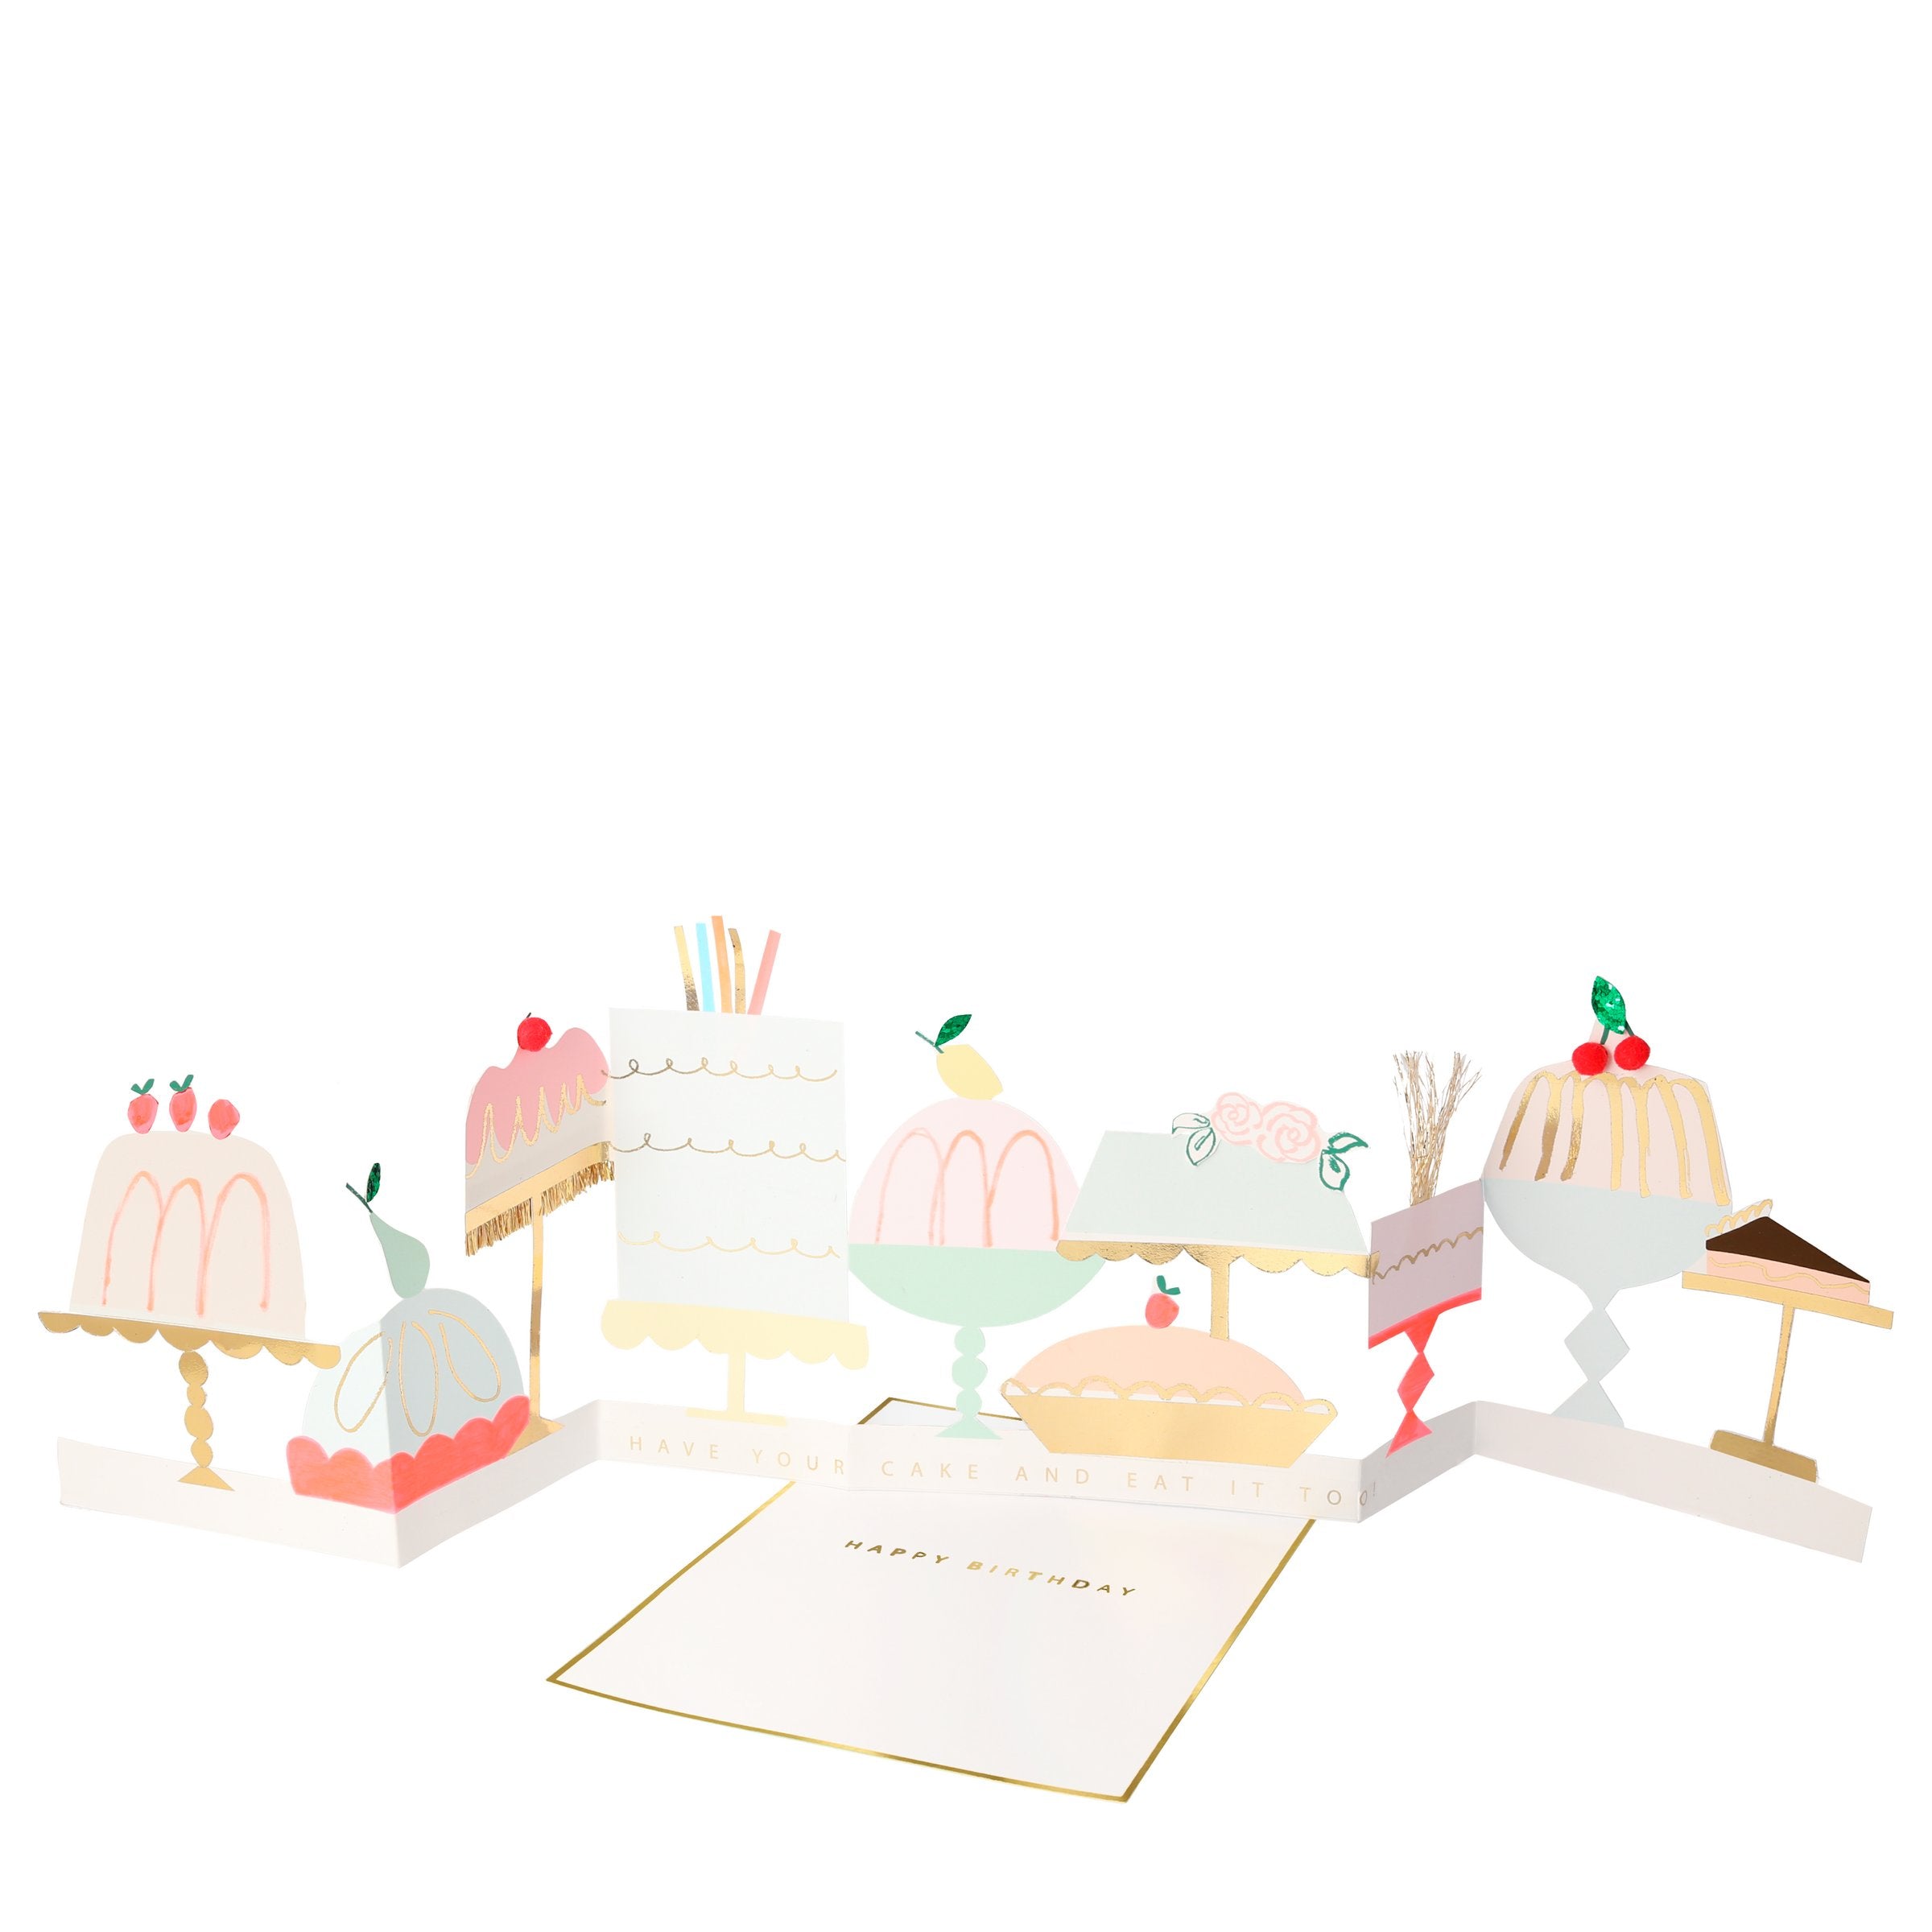 Our 3D birthday card features cakes with pompom embellishments.